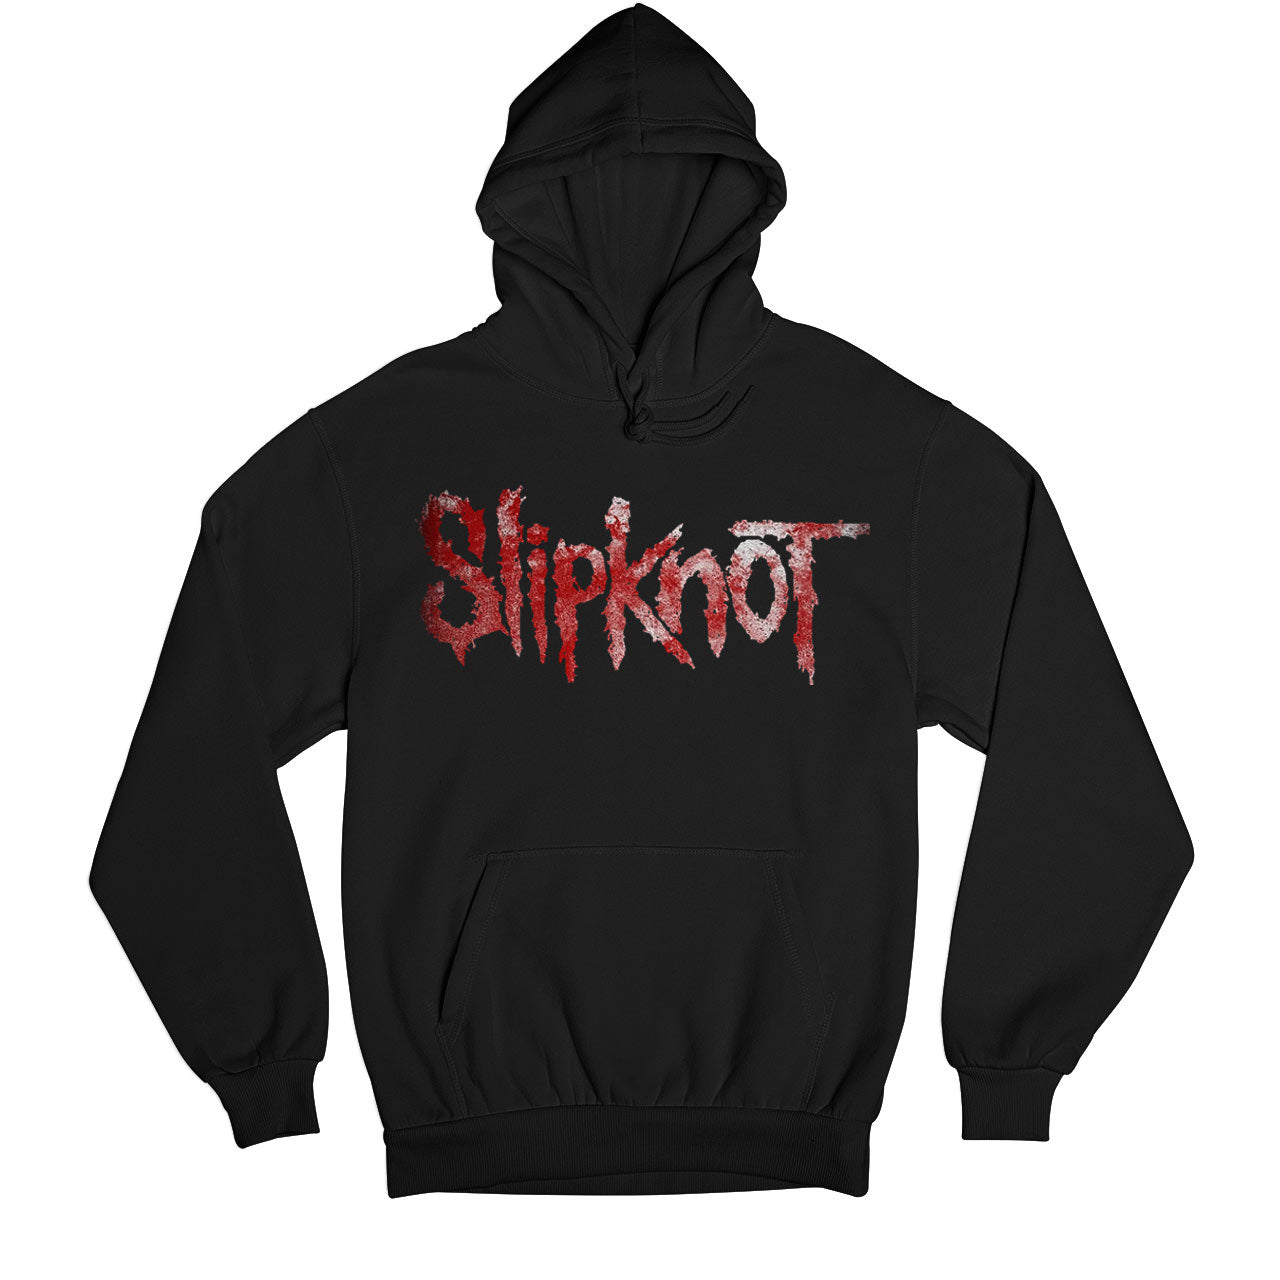 Slipknot Hoodie - On Sale - XS (Chest size 38 IN)